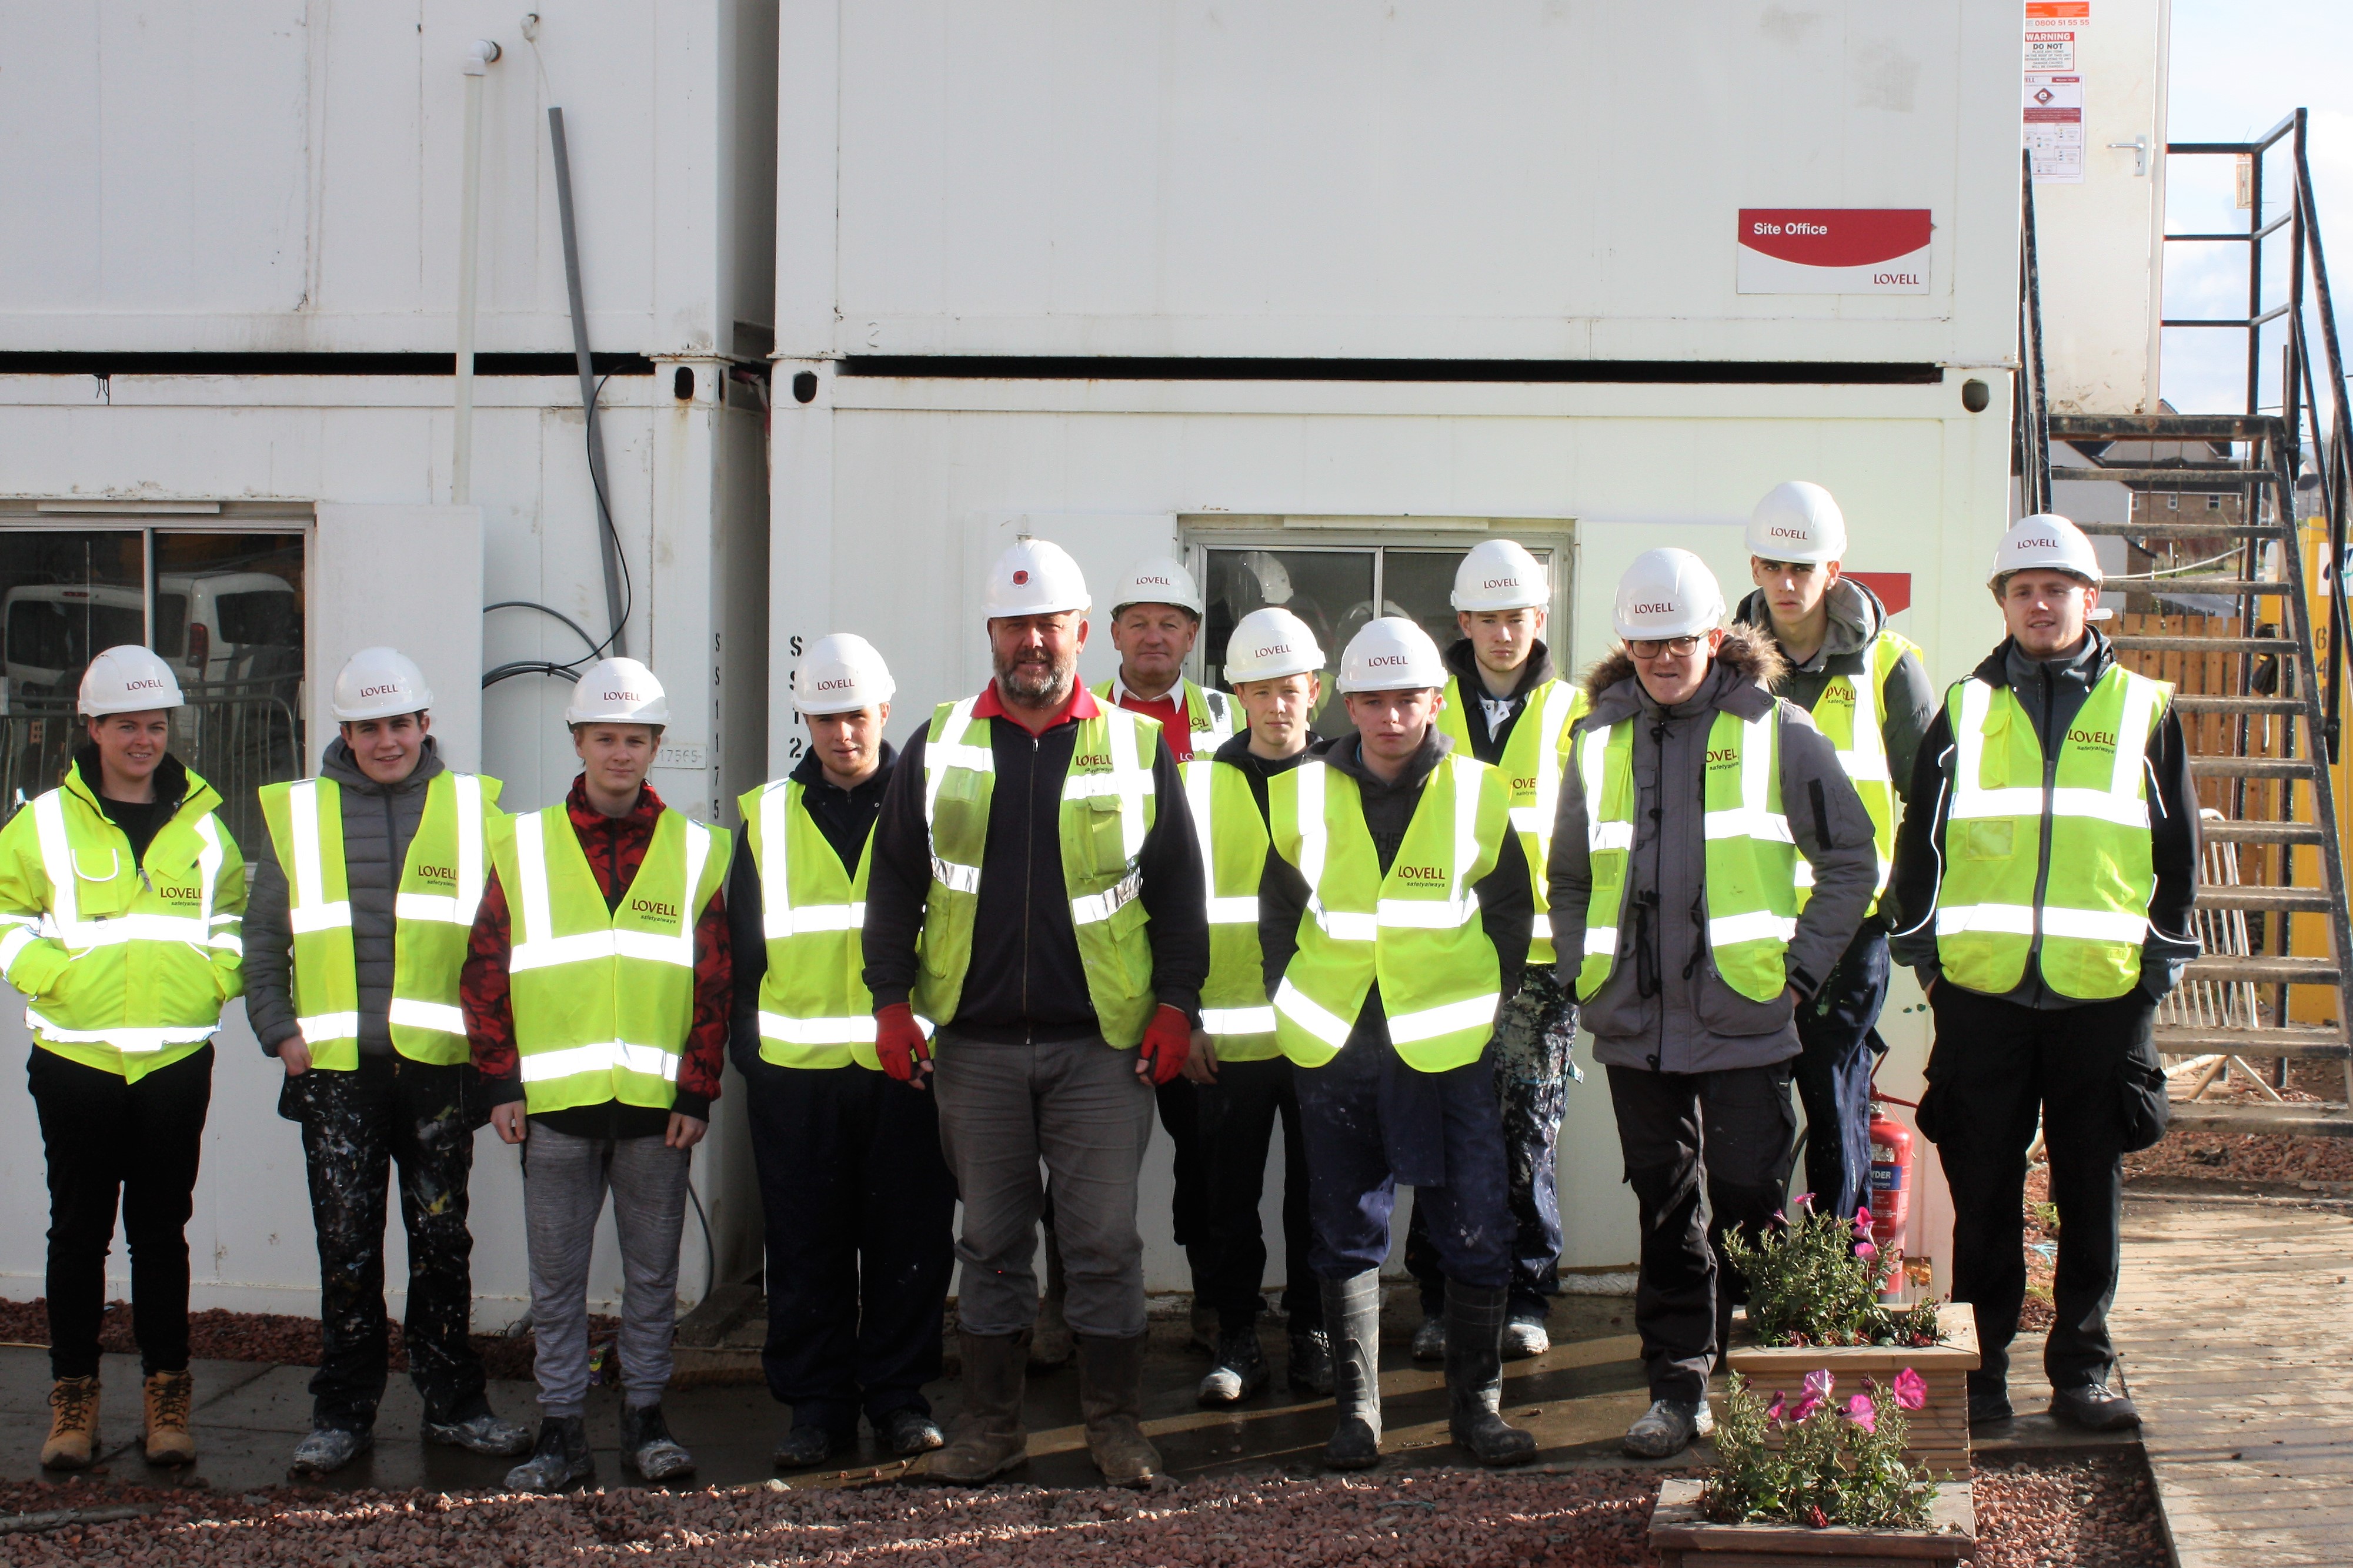 Bathgate housing site offers young trainees ‘first steps’ into construction